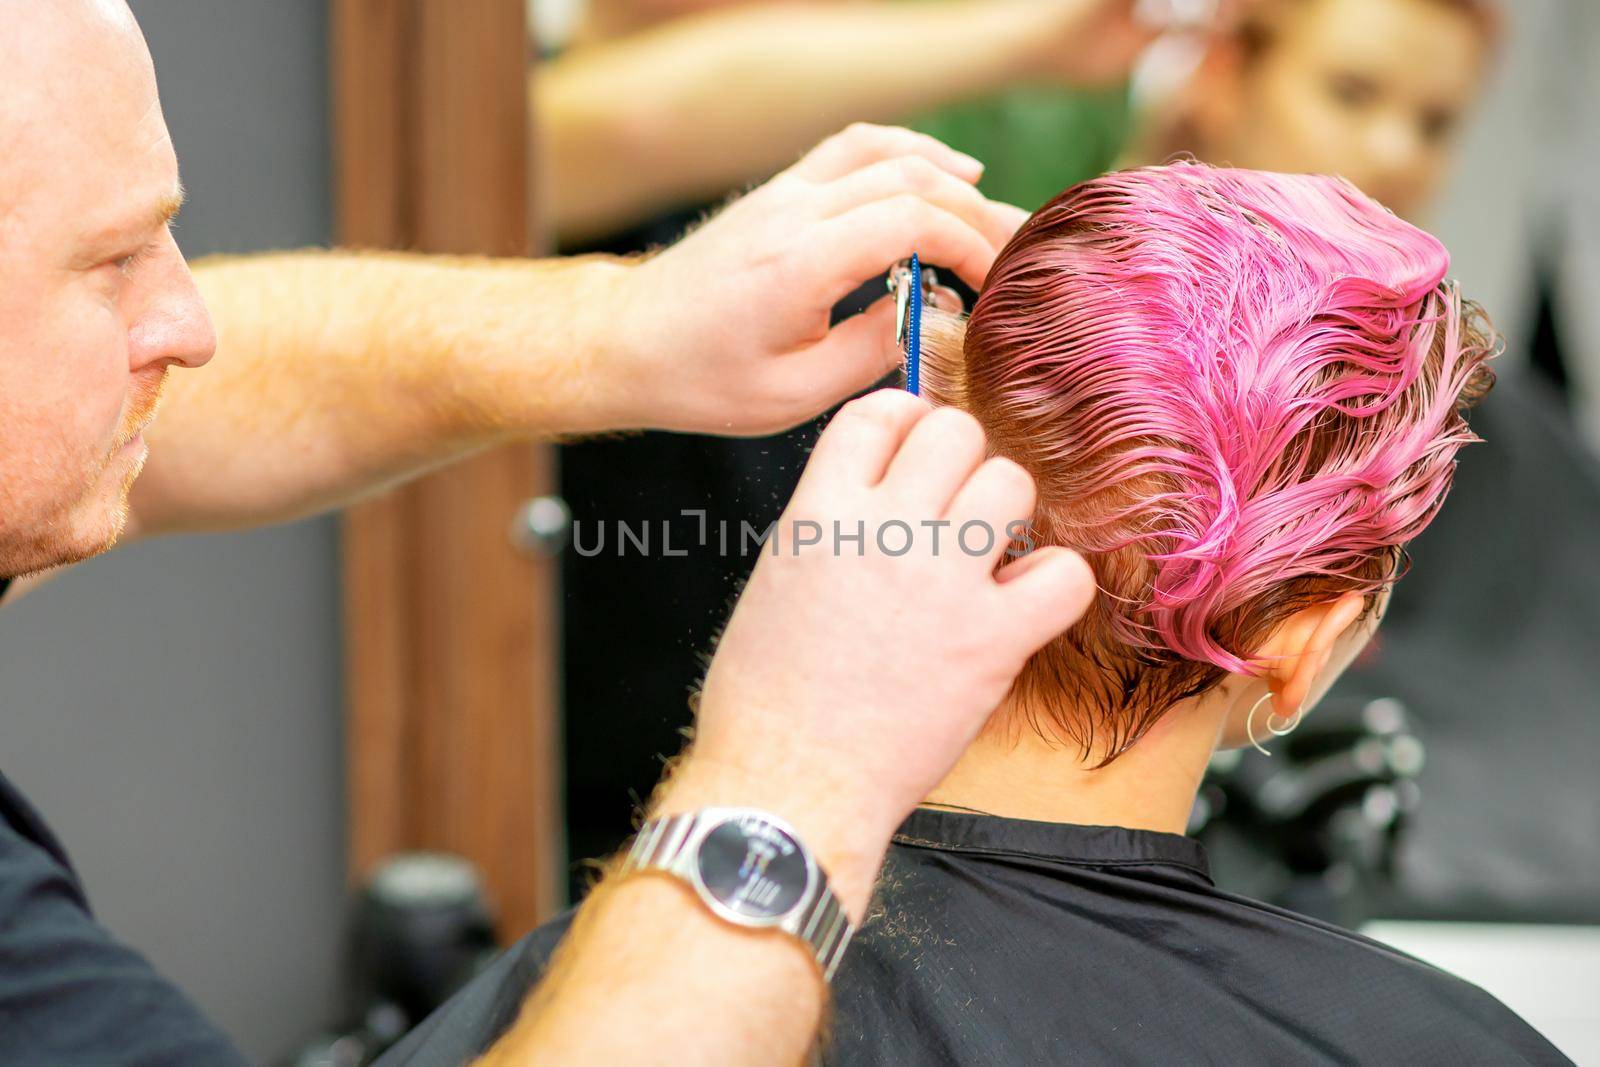 Haircut of dyed short pink wet hair of young caucasian woman by a male hairdresser in a barbershop. by okskukuruza